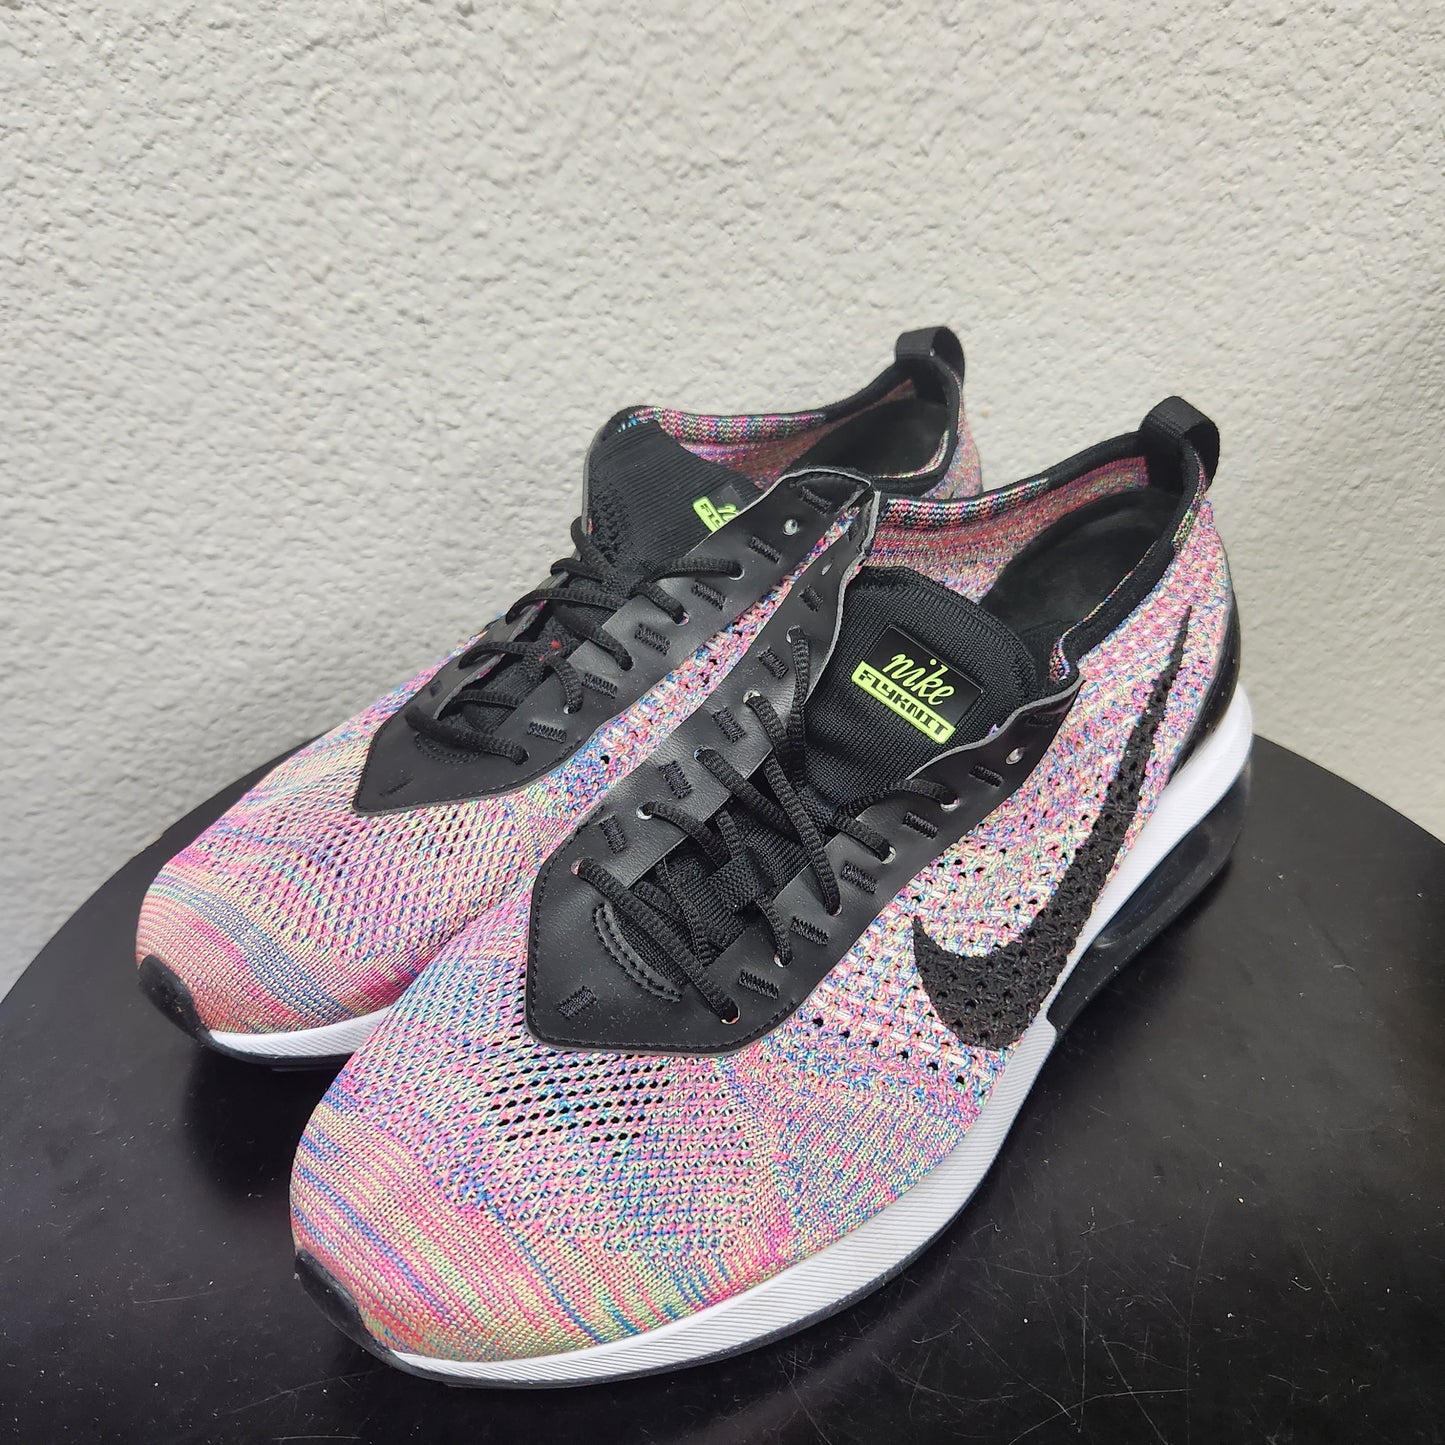 Nike Air Max Flyknit Multi-Color